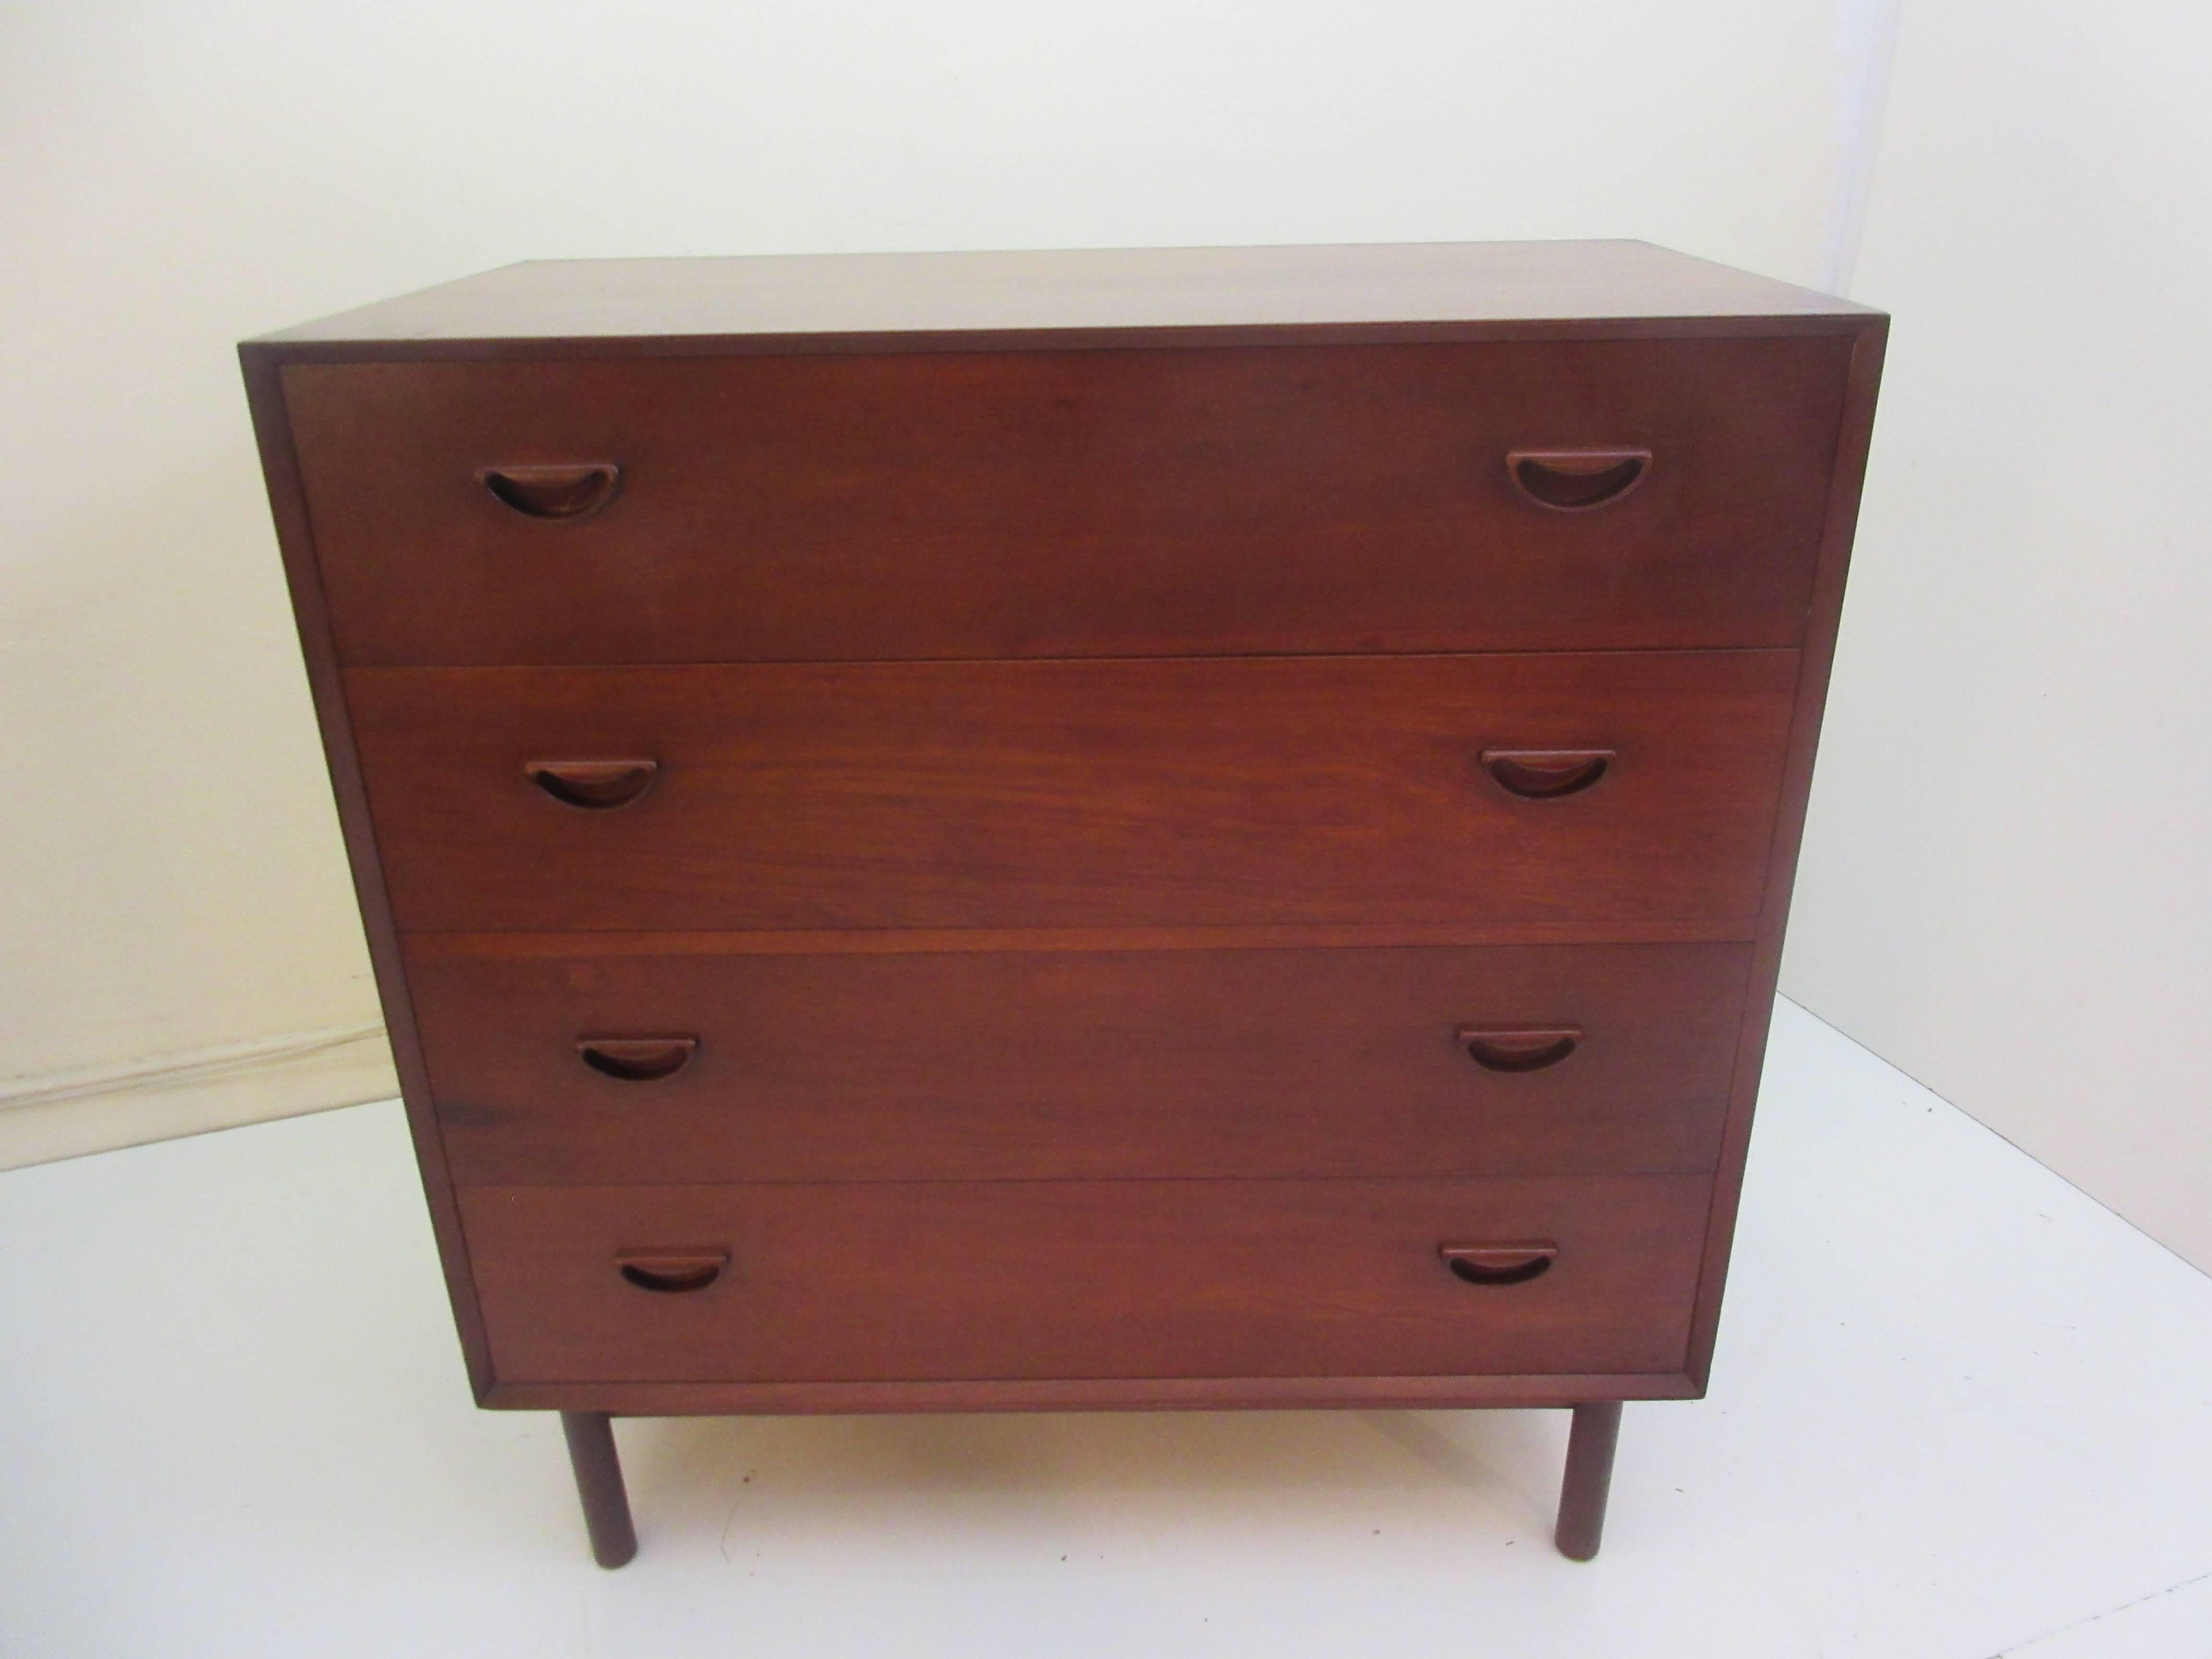 Peter Hvidt for John Stuart solid teak drop front desk or vanity with three storage drawers. Model number 307C in the John Stuart, 1957 catalogue (pictured). This piece has the unique to Hdivt tenon joinery on the corners of the cabinet top and